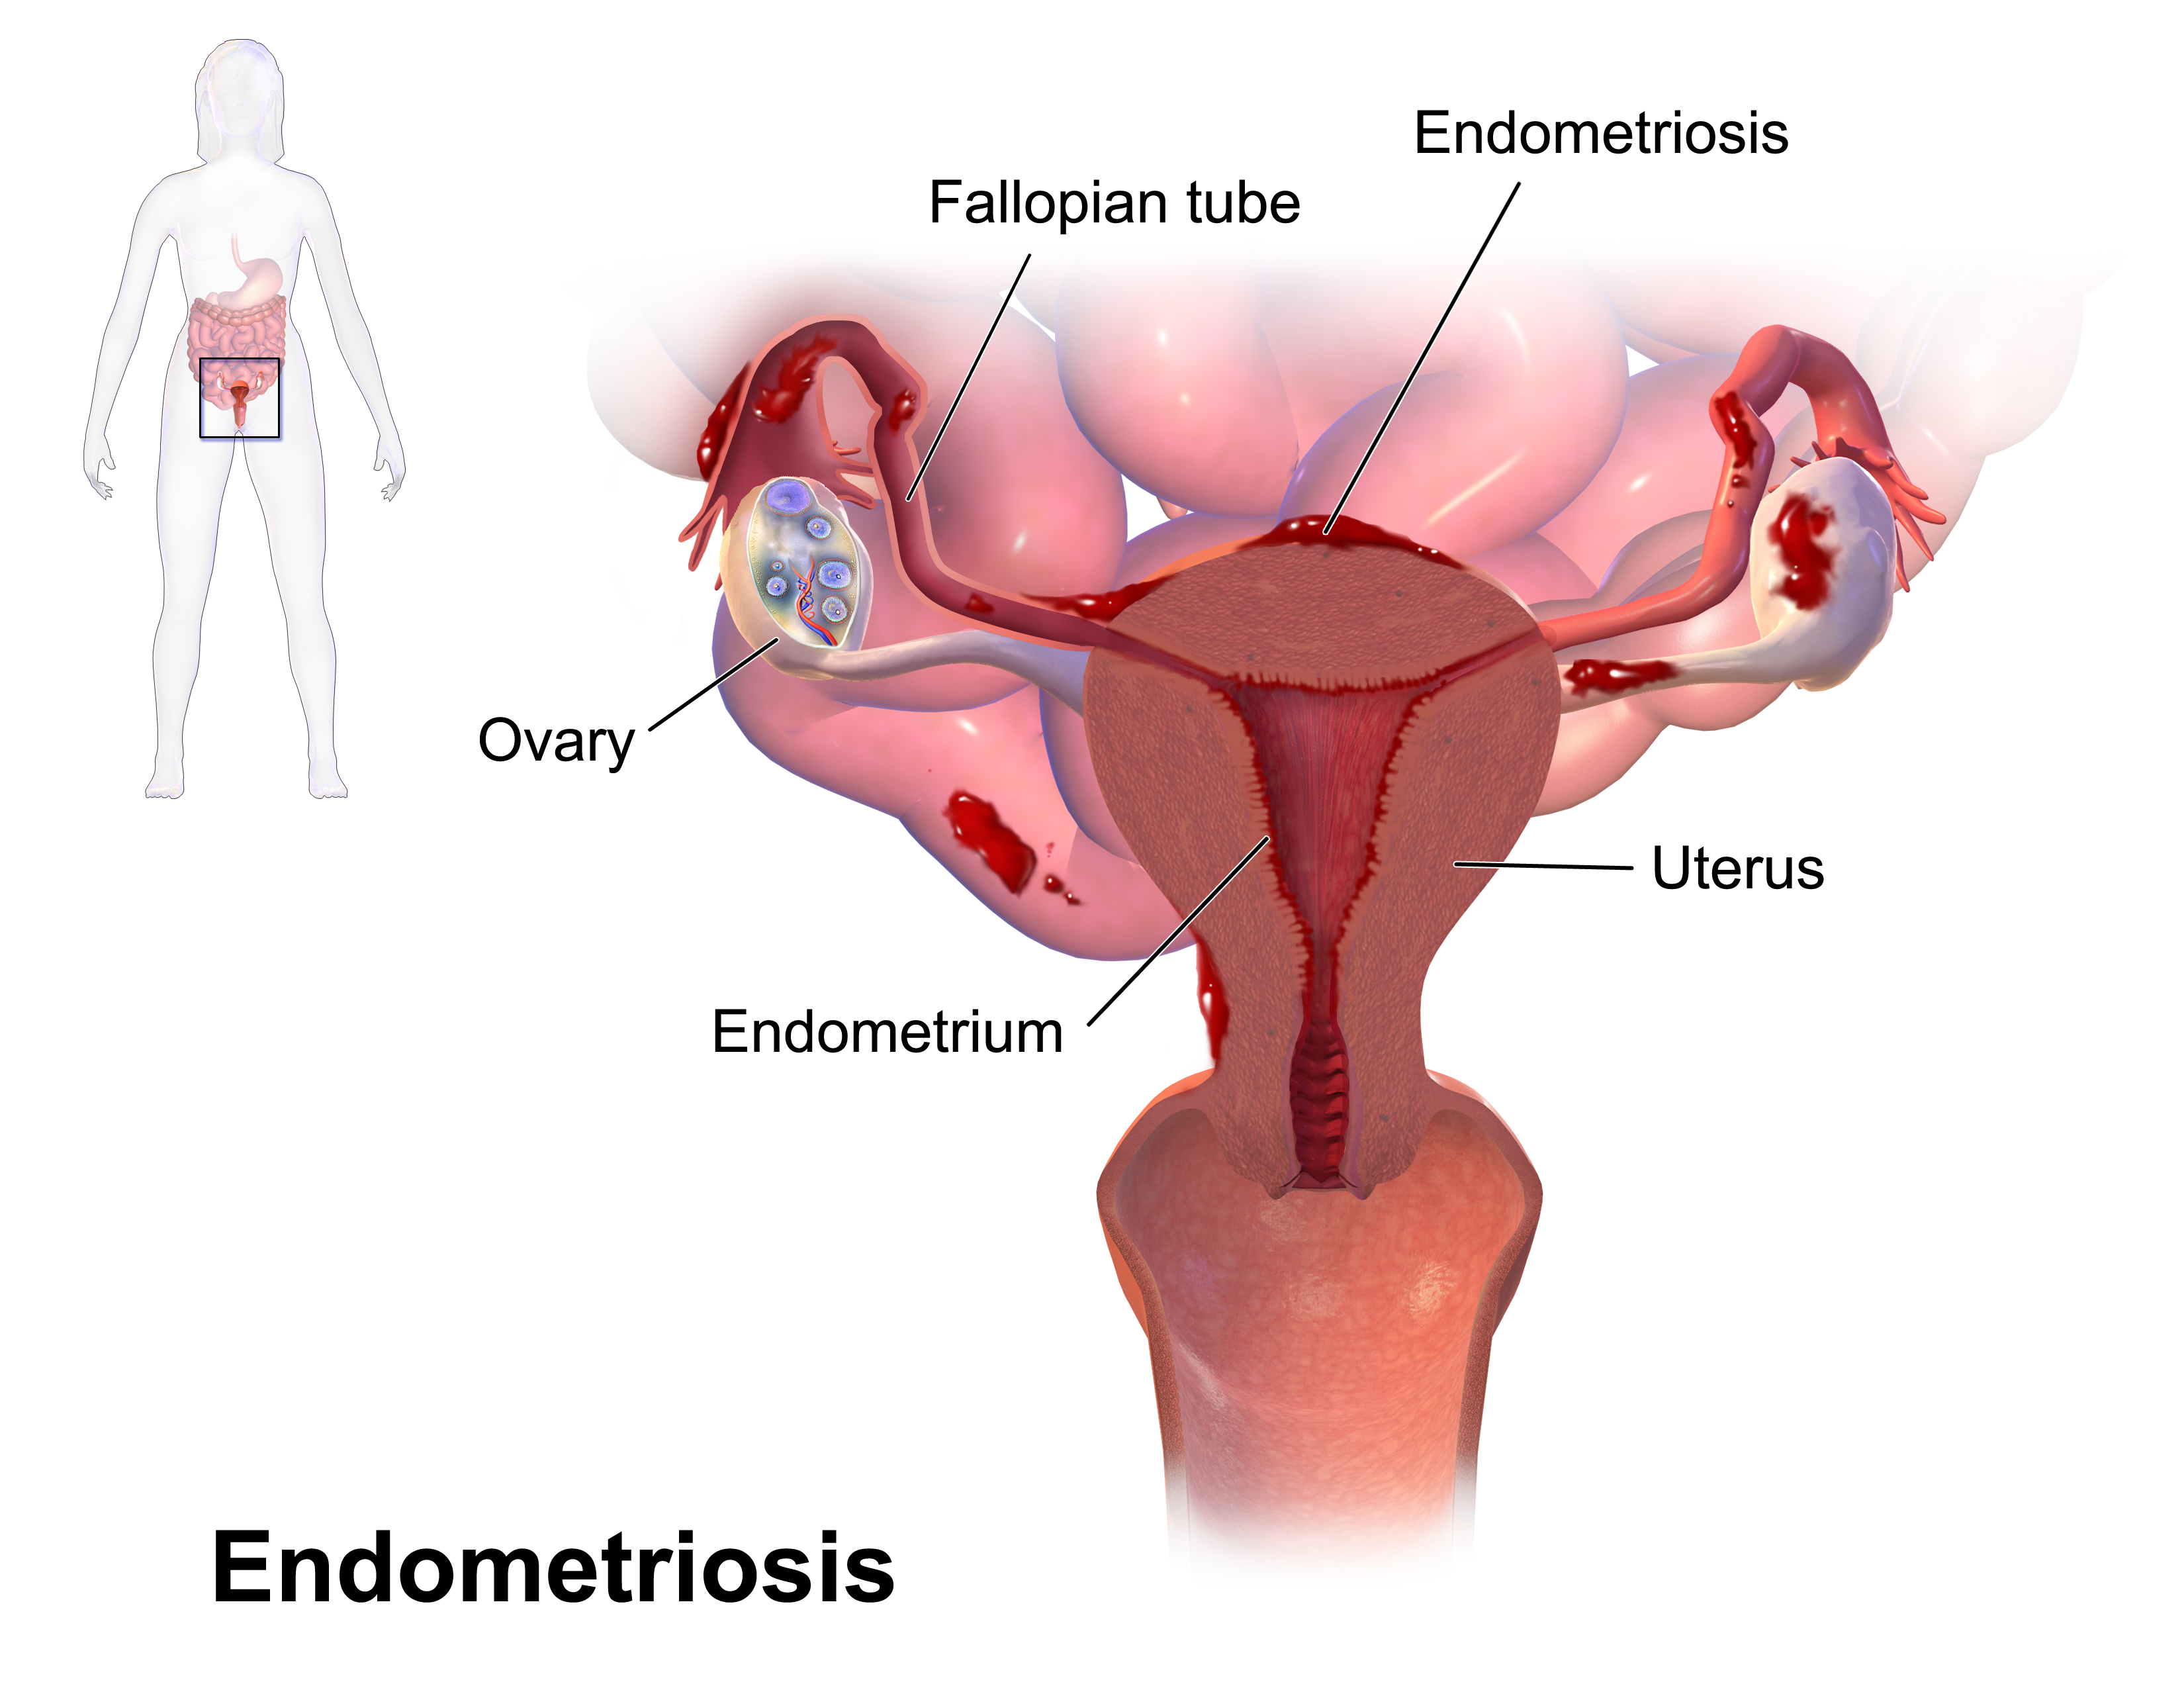 Endometriosis is characterized by the presence of ectopic endometrial tissue (source)